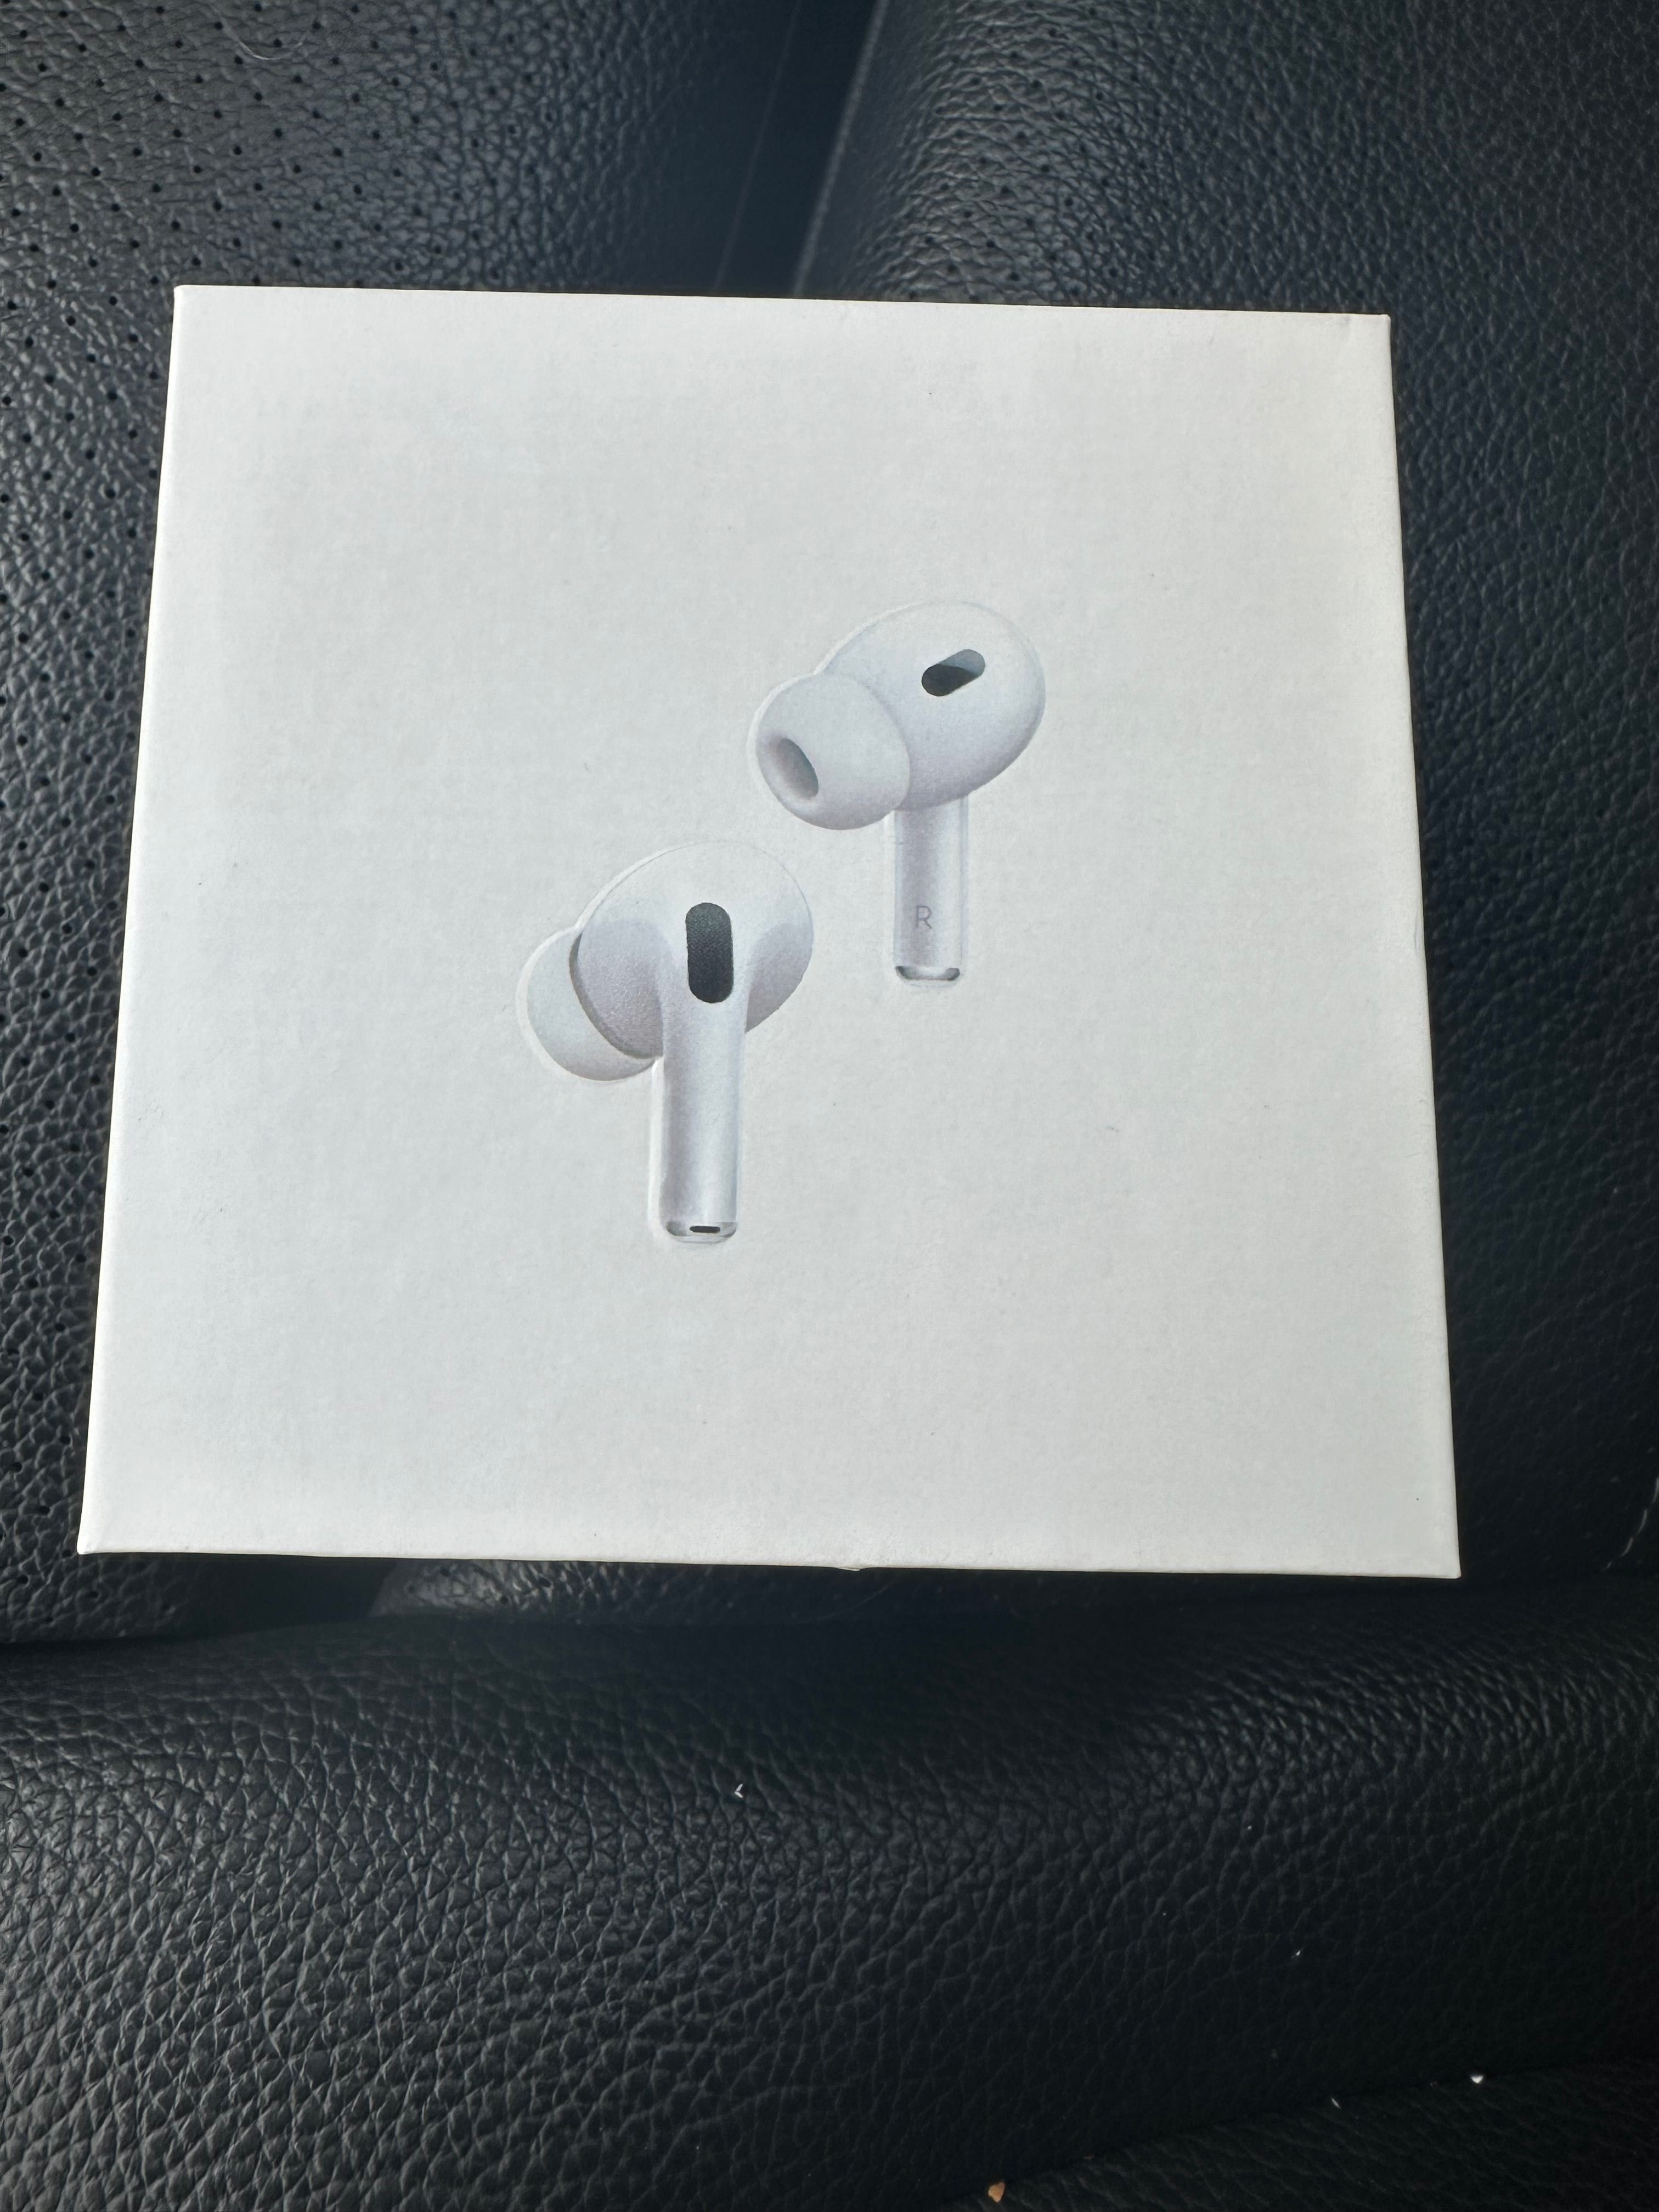 Airpods Pro 2th generation